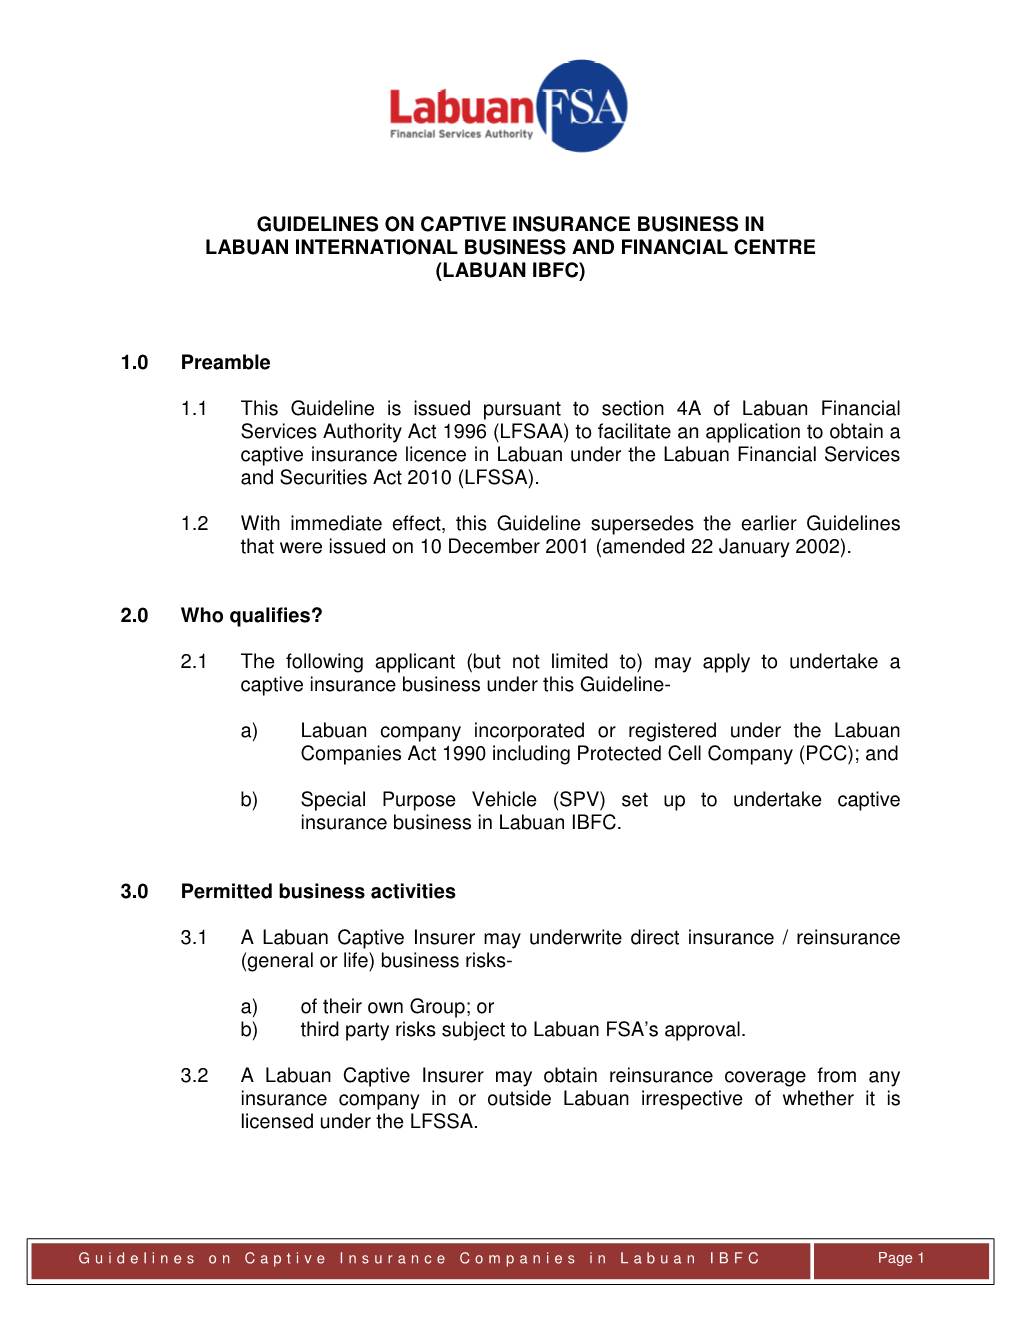 Guidelines on Captive Insurance Business in Labuan International Business and Financial Centre (Labuan Ibfc)